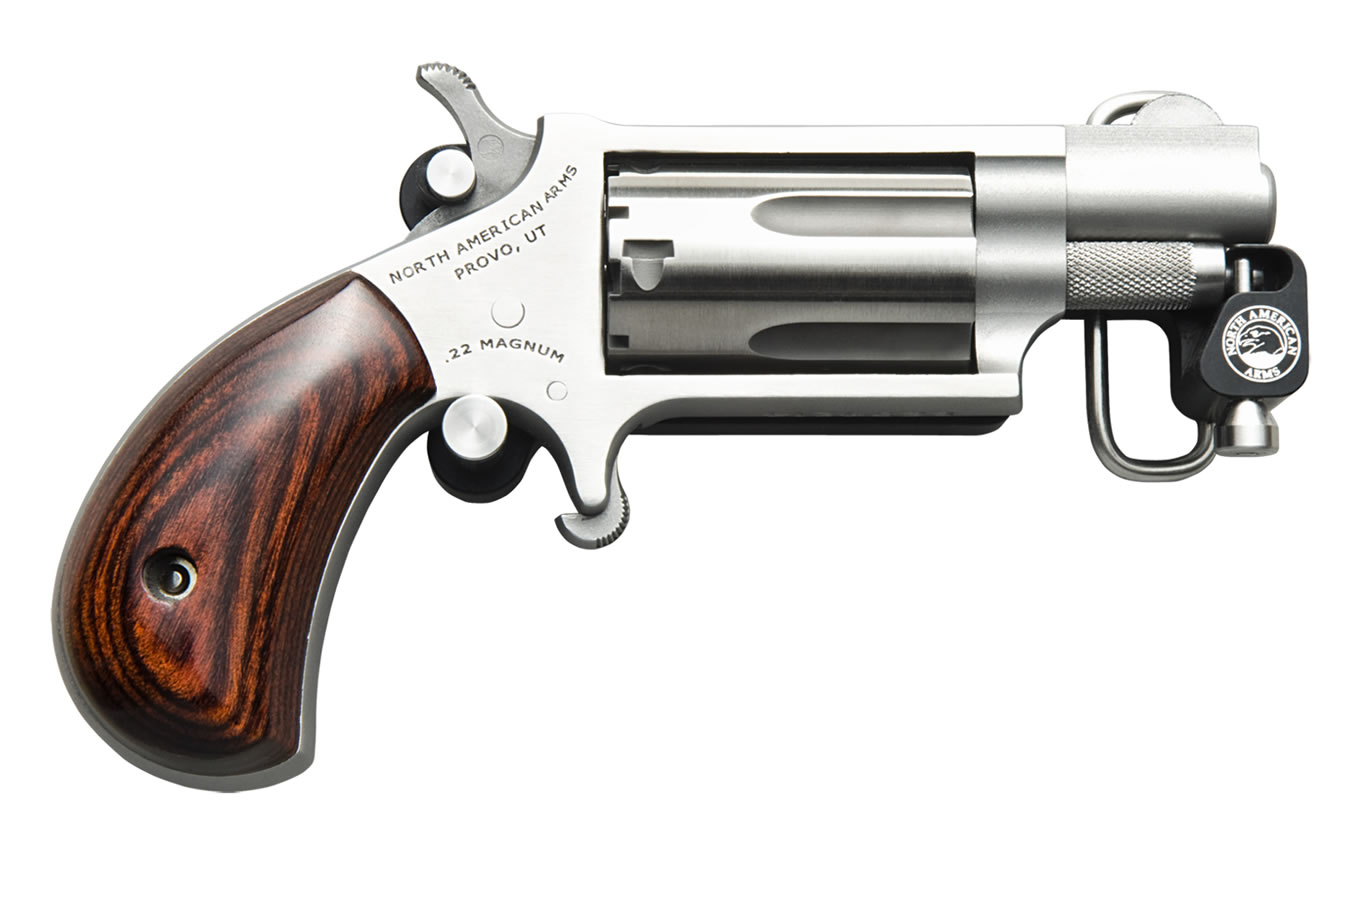 North American Arms 22 Magnum Mini Revolver with Belt Buckle Vance